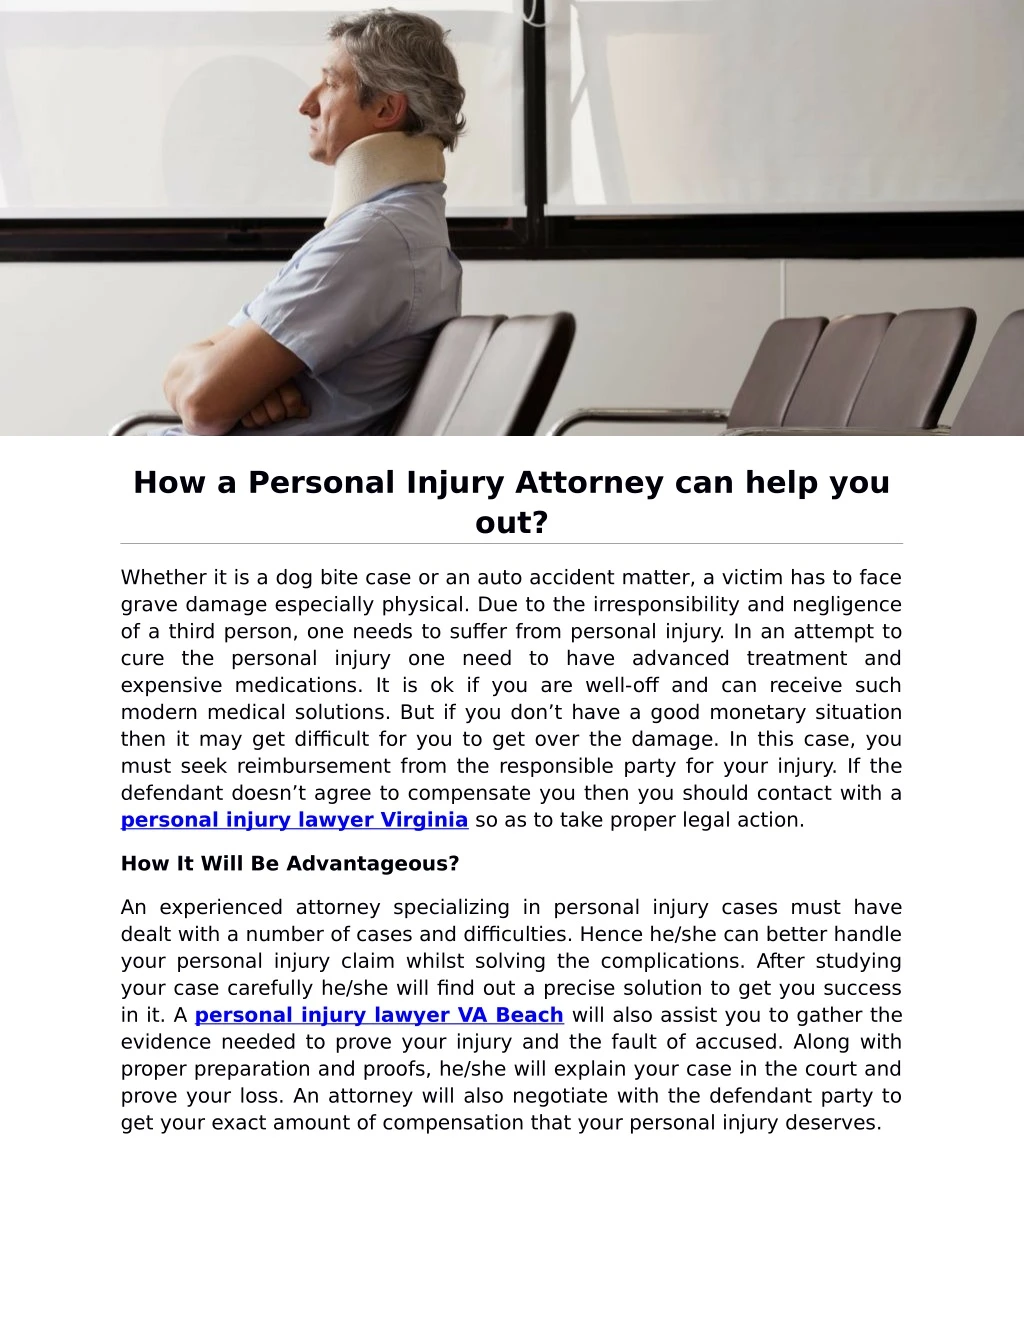 how a personal injury attorney can help you out